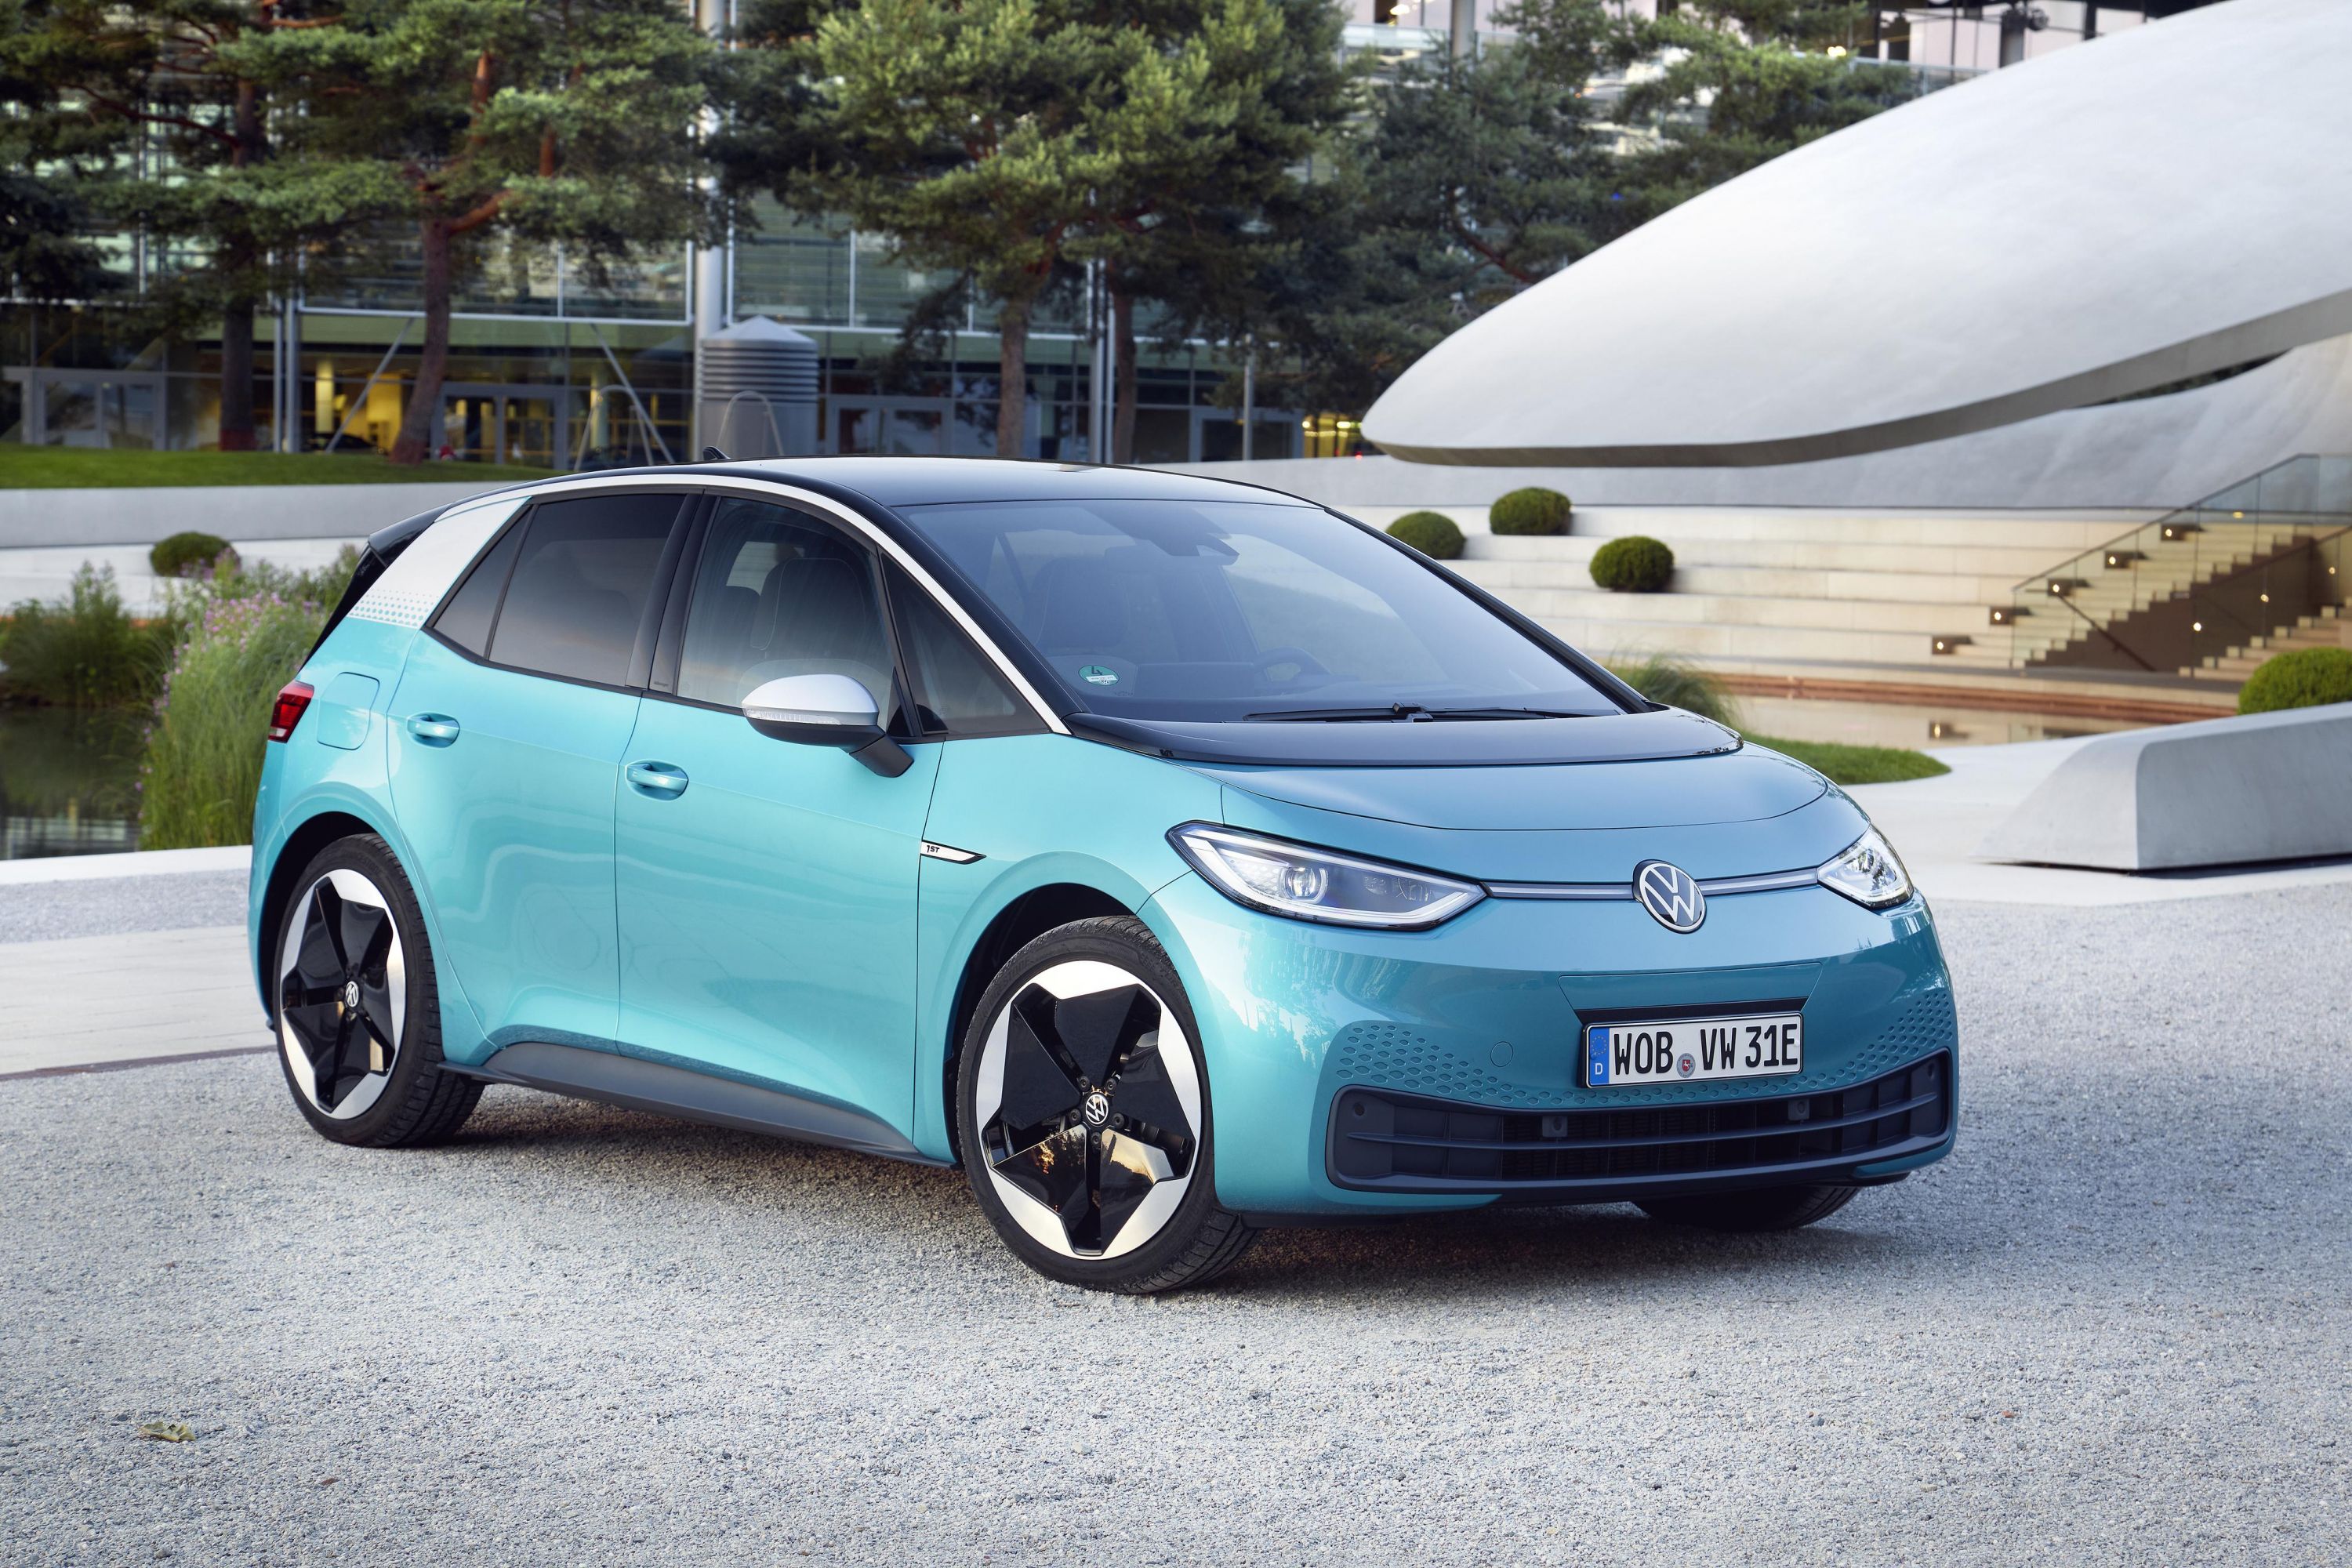 Volkswagen developing ID.1, ID.2 entrylevel electric vehicles report